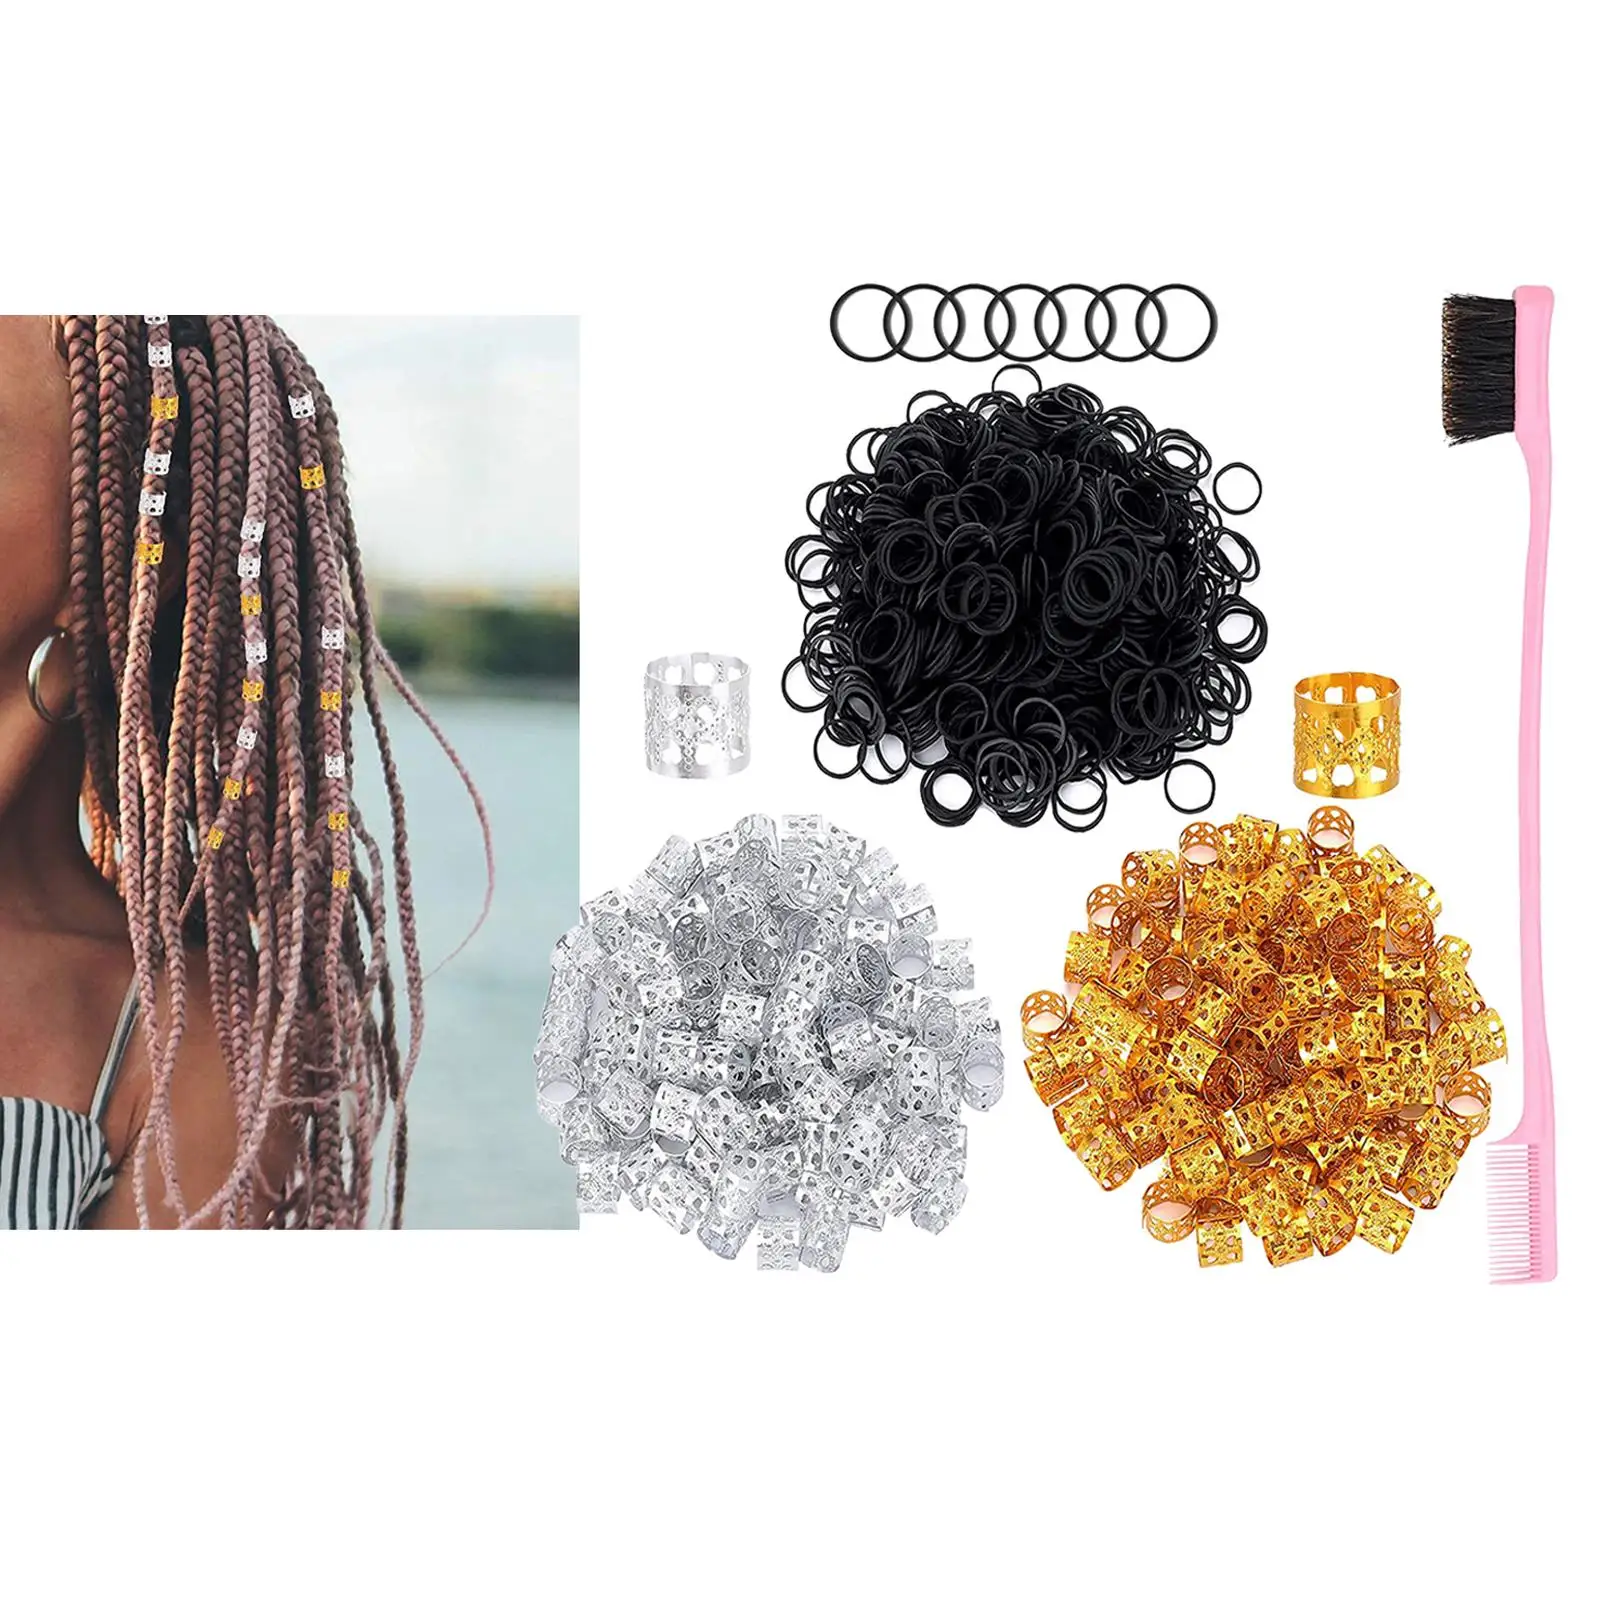 1201 Pieces  Beads, Metal Decoration Accessory, with Double-Ended Eyebrow Brush Jewelry Hair Braid Rings Clips for Braids Women